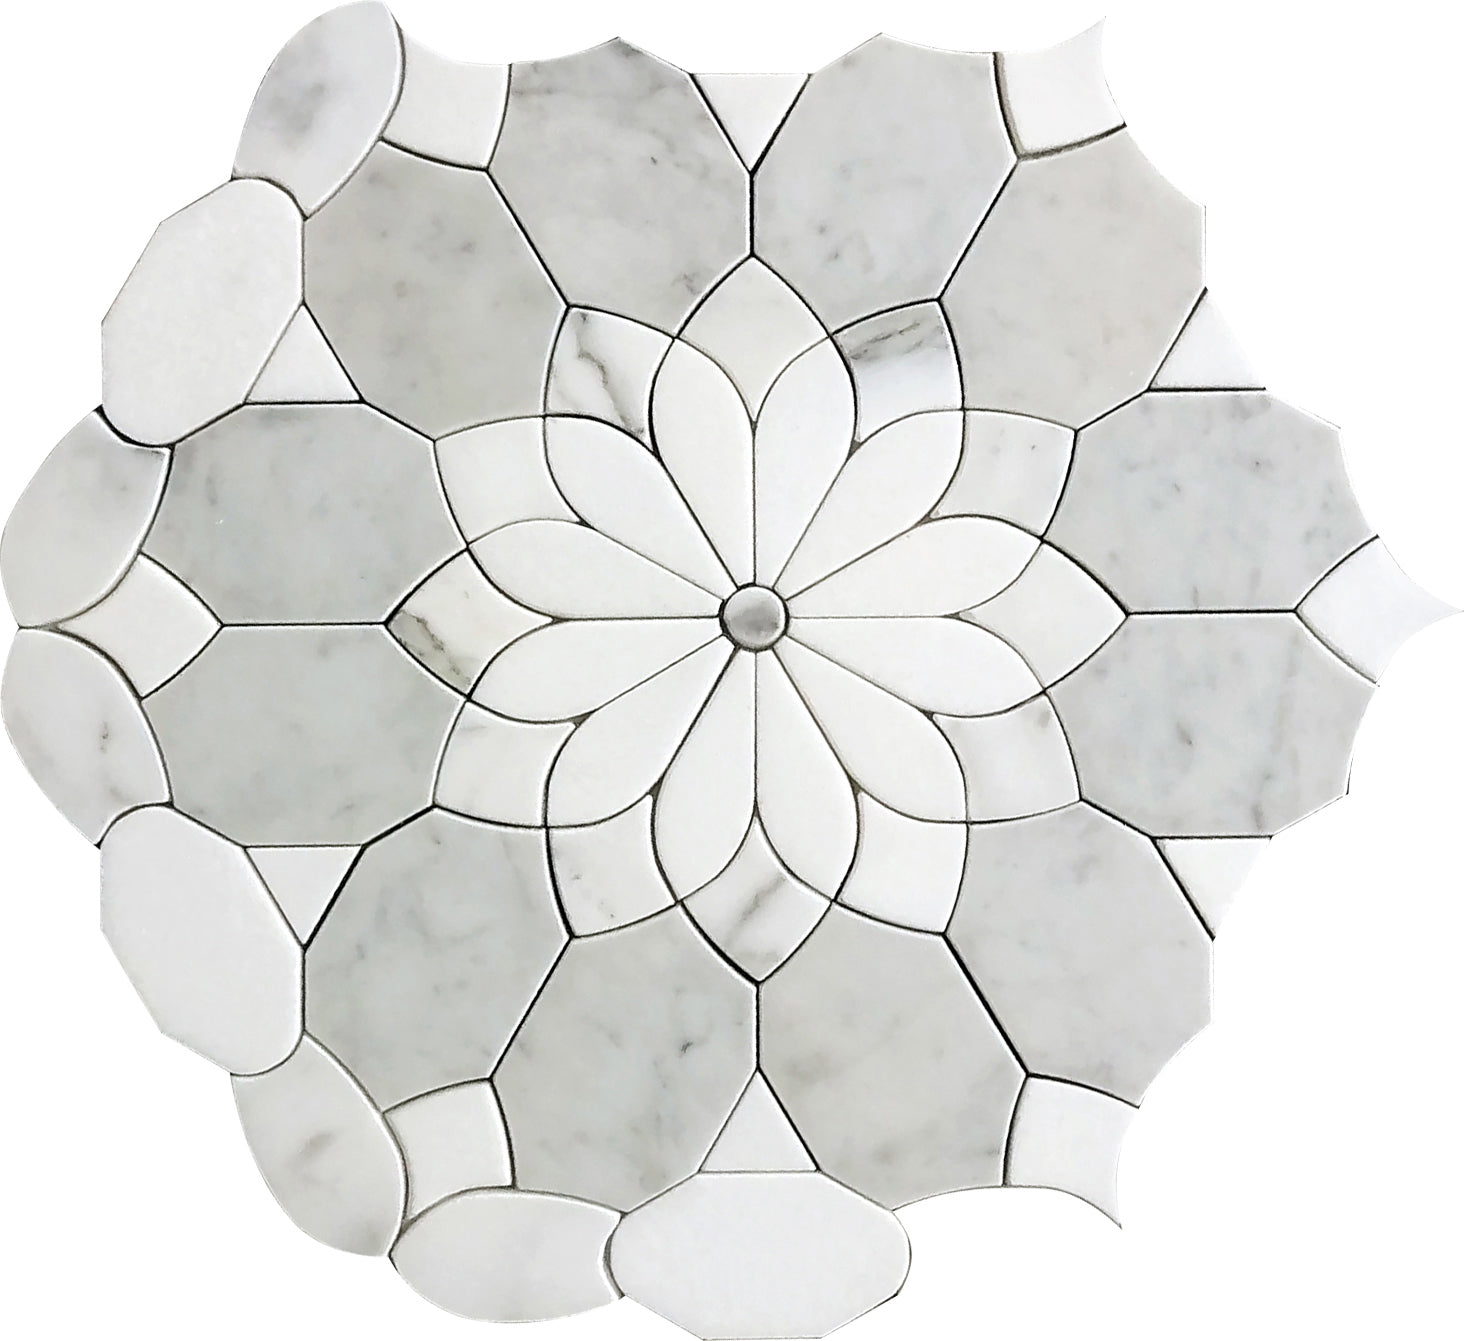 mir skalini waterjet merletto beige wall and floor mosaic distributed by surface group natural materials